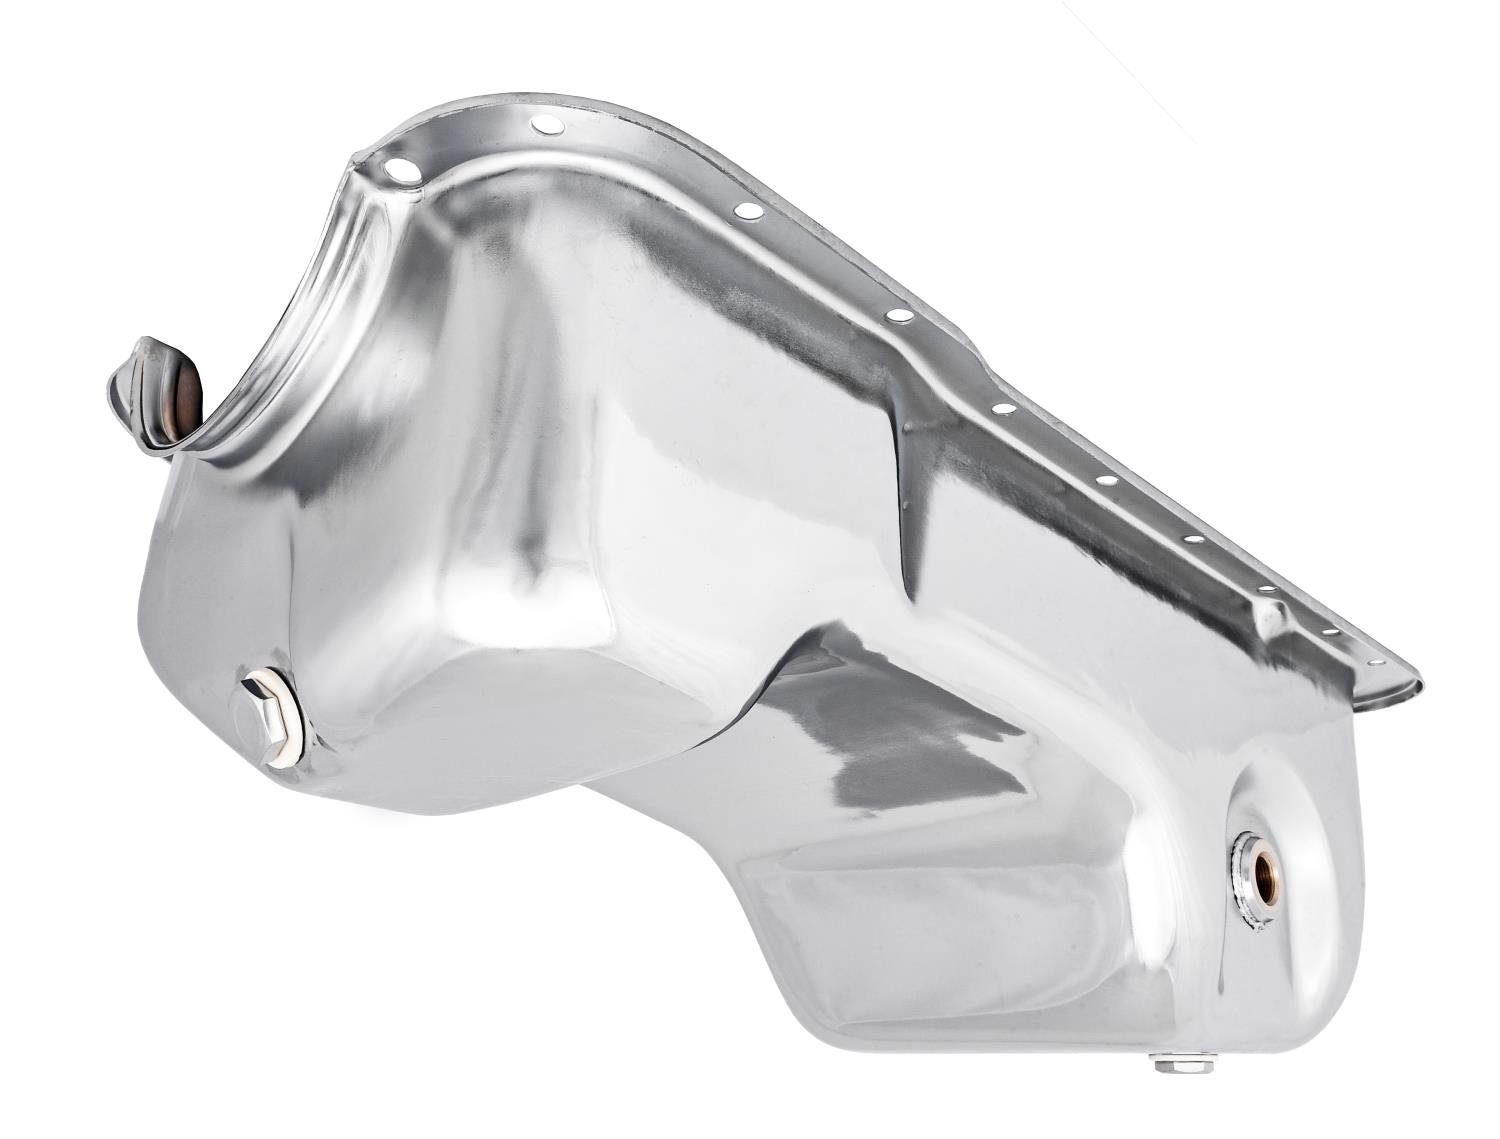 Stock-Style Replacement Oil Pan for 1979-1995 Ford Mustang 5.0L w/Low Oil Level Sensor Port [Chrome]